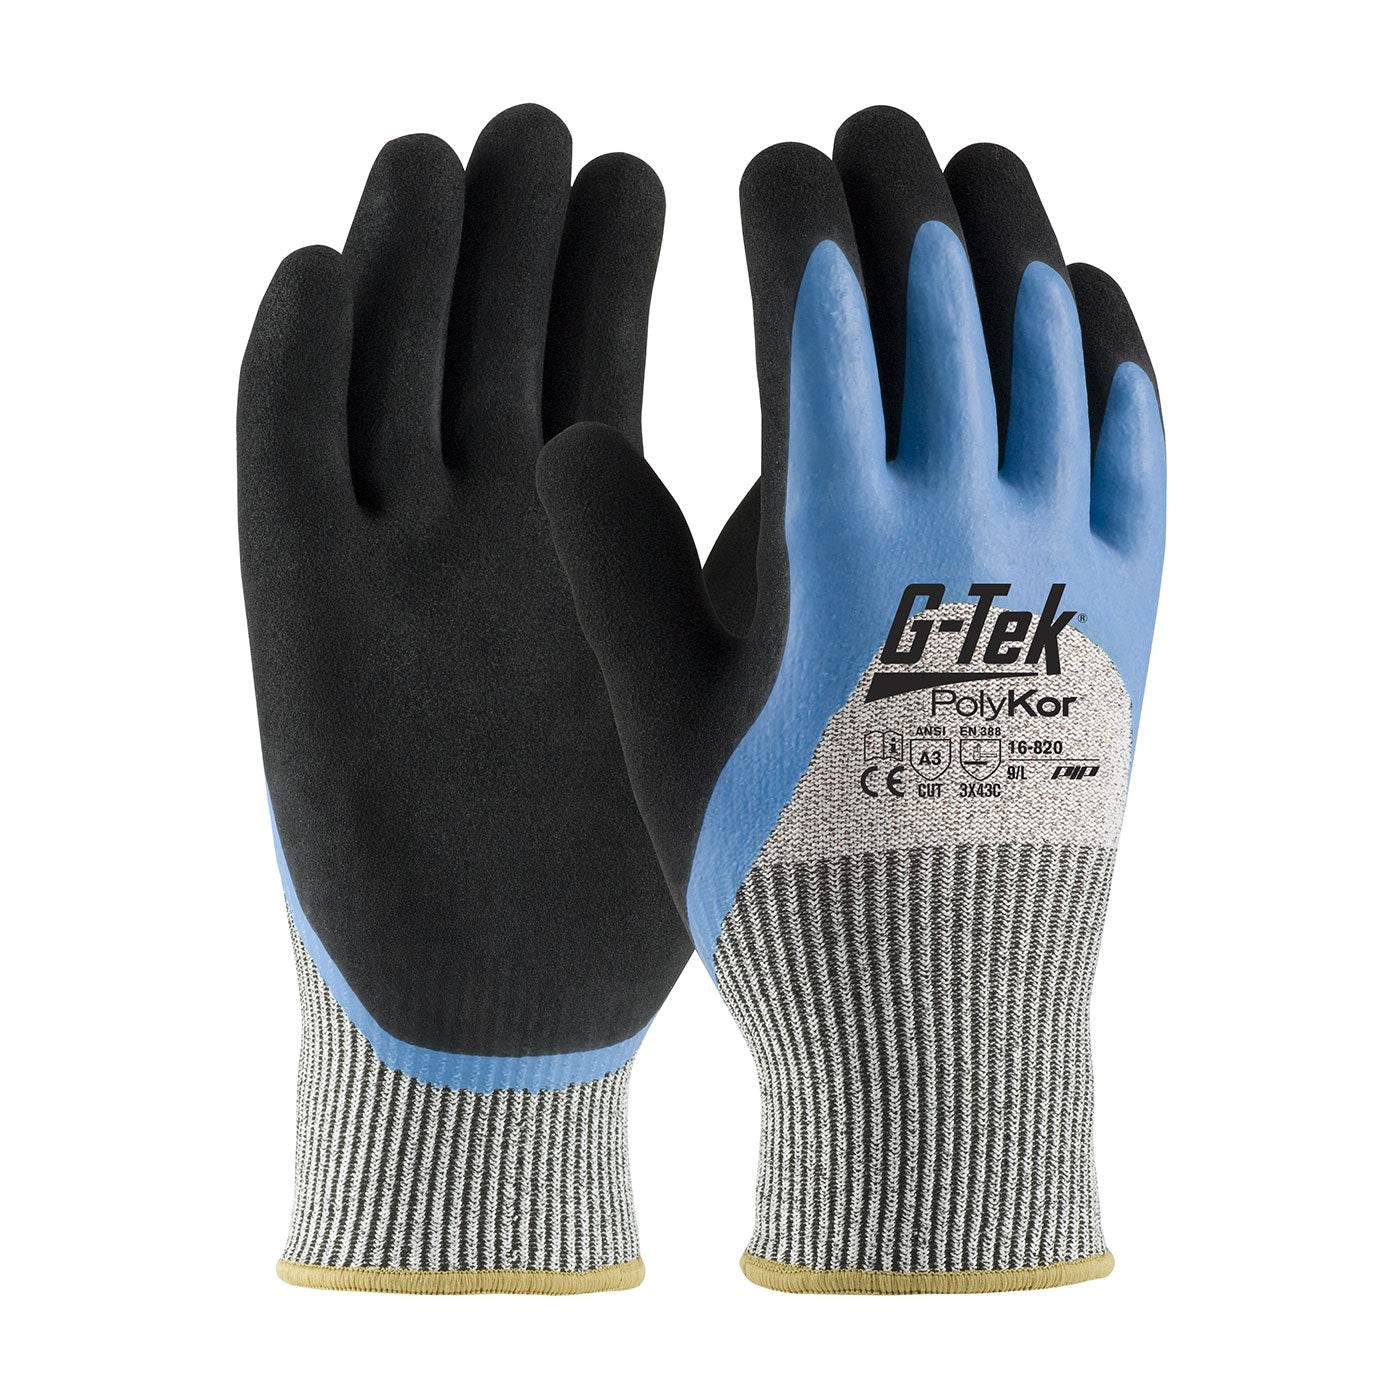 G-Tek® PolyKor® Seamless Knit PolyKor® Blended Glove with Acrylic Lining and Double-Dipped Latex Coated MicroSurface Grip on Palm, Fingers & Knuckles-eSafety Supplies, Inc